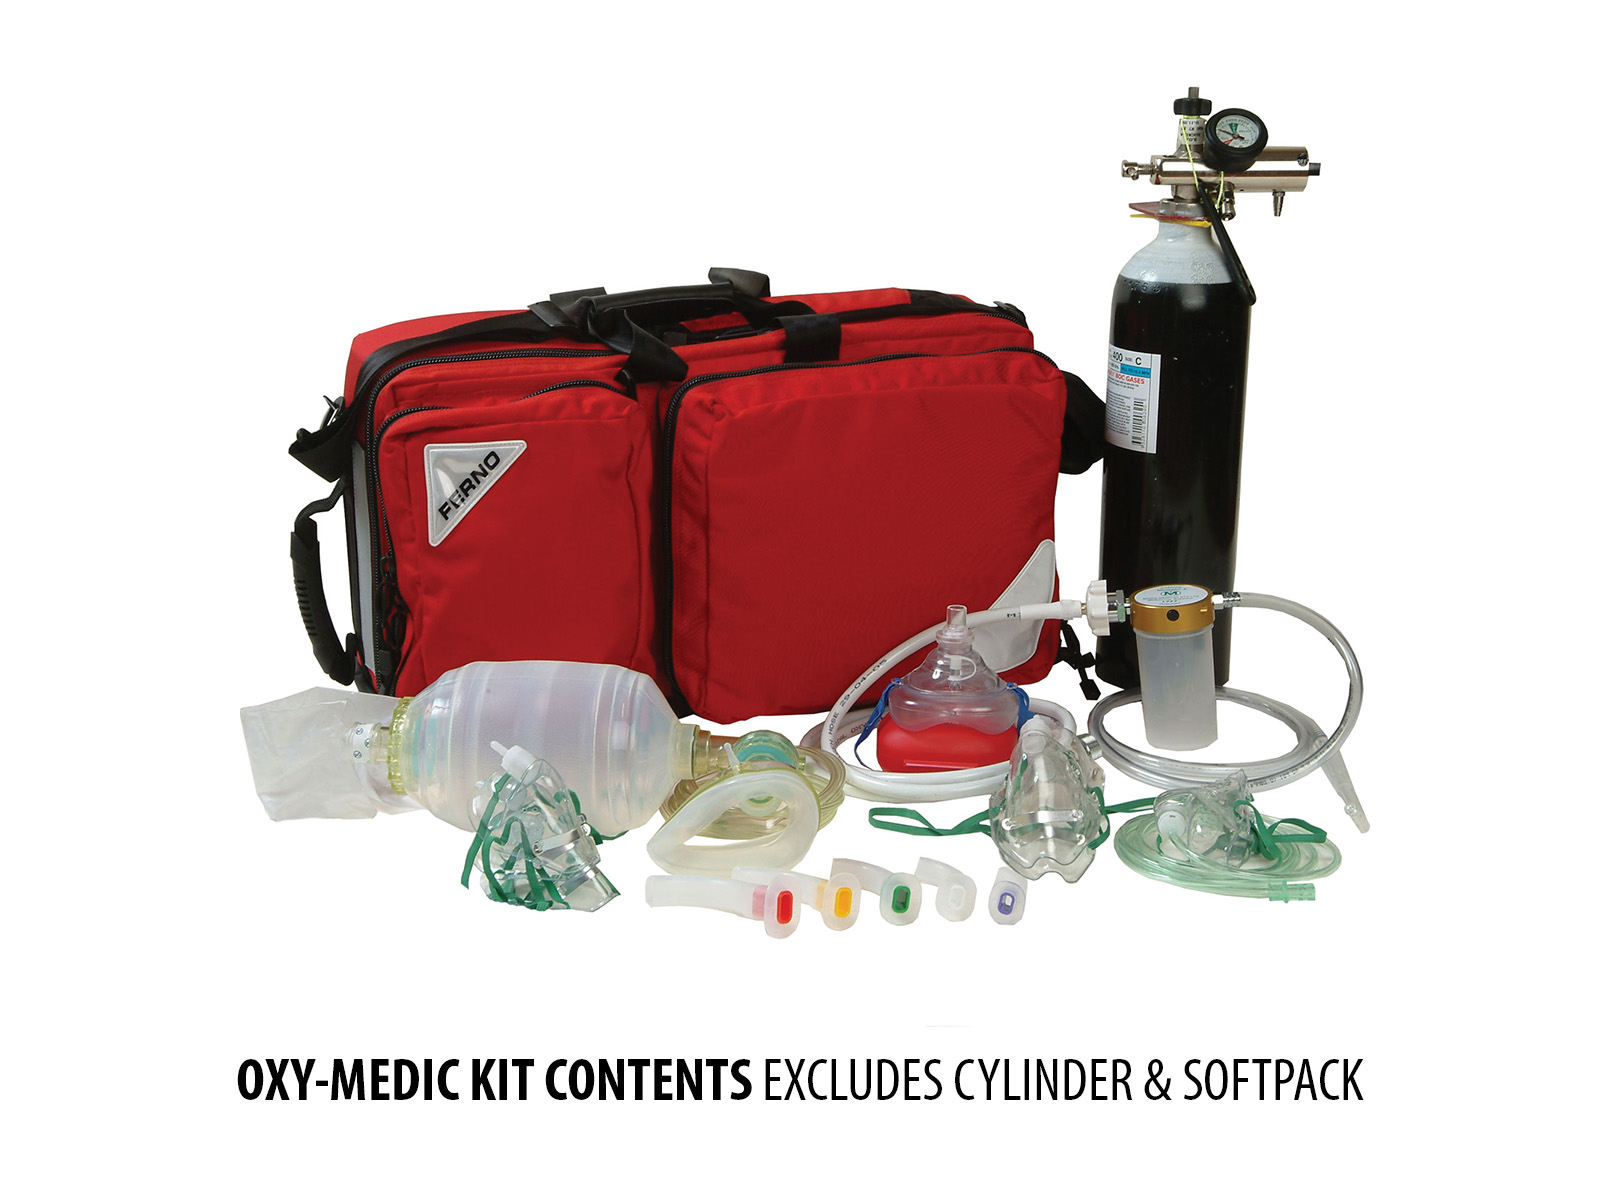 Oxy-Medic Kit Contents